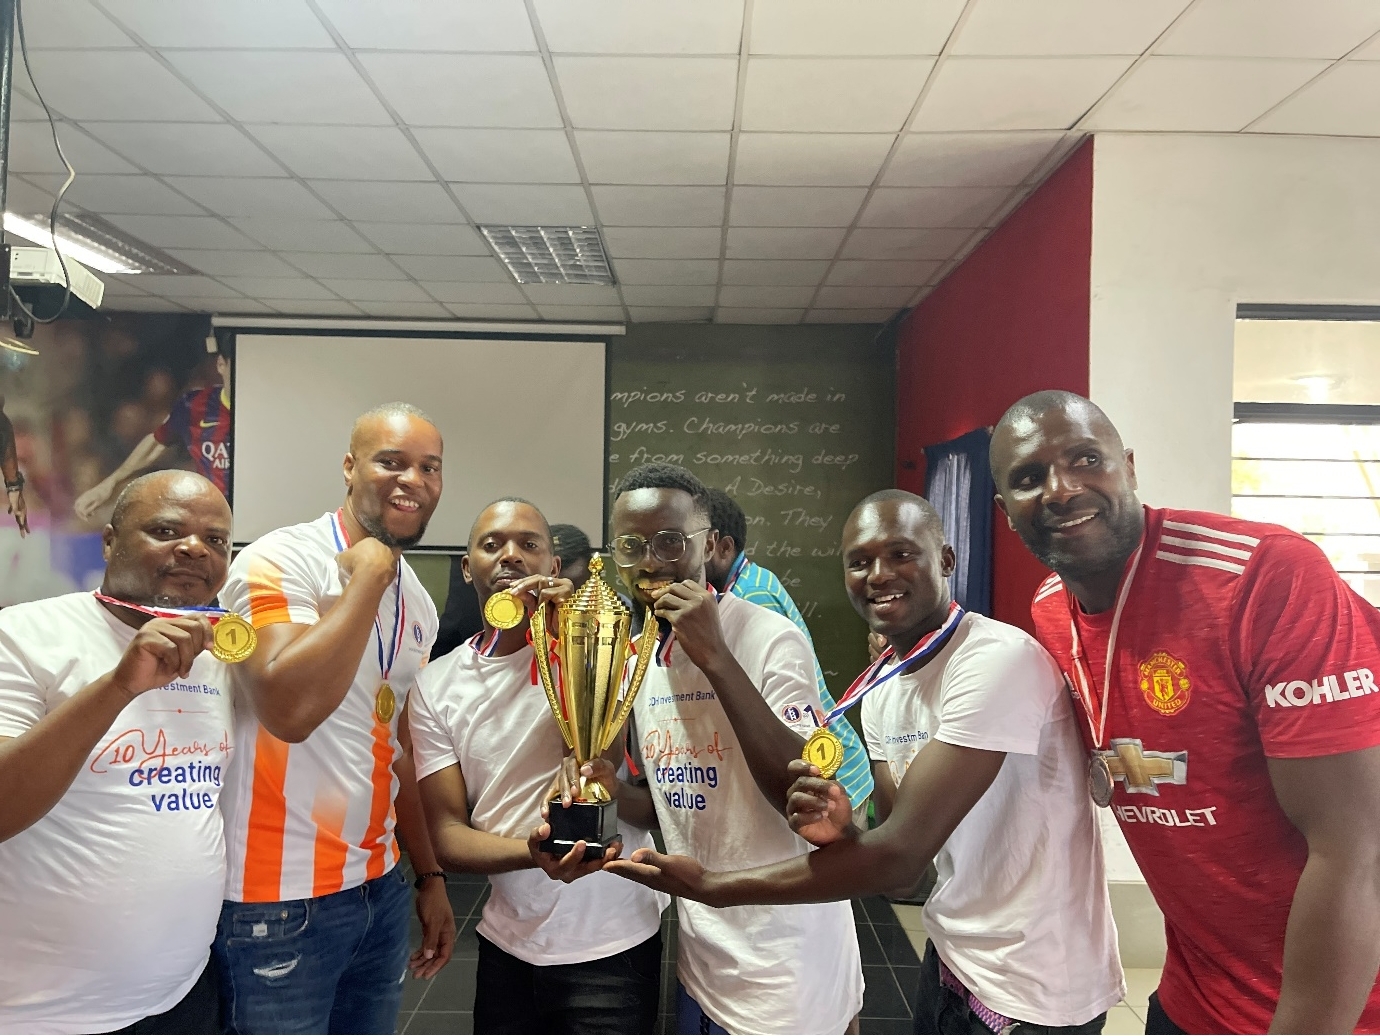 In the picture: CDH Investment Bank team celebrates its victory at the Malawi Intercompany Sports Corporate Carnival